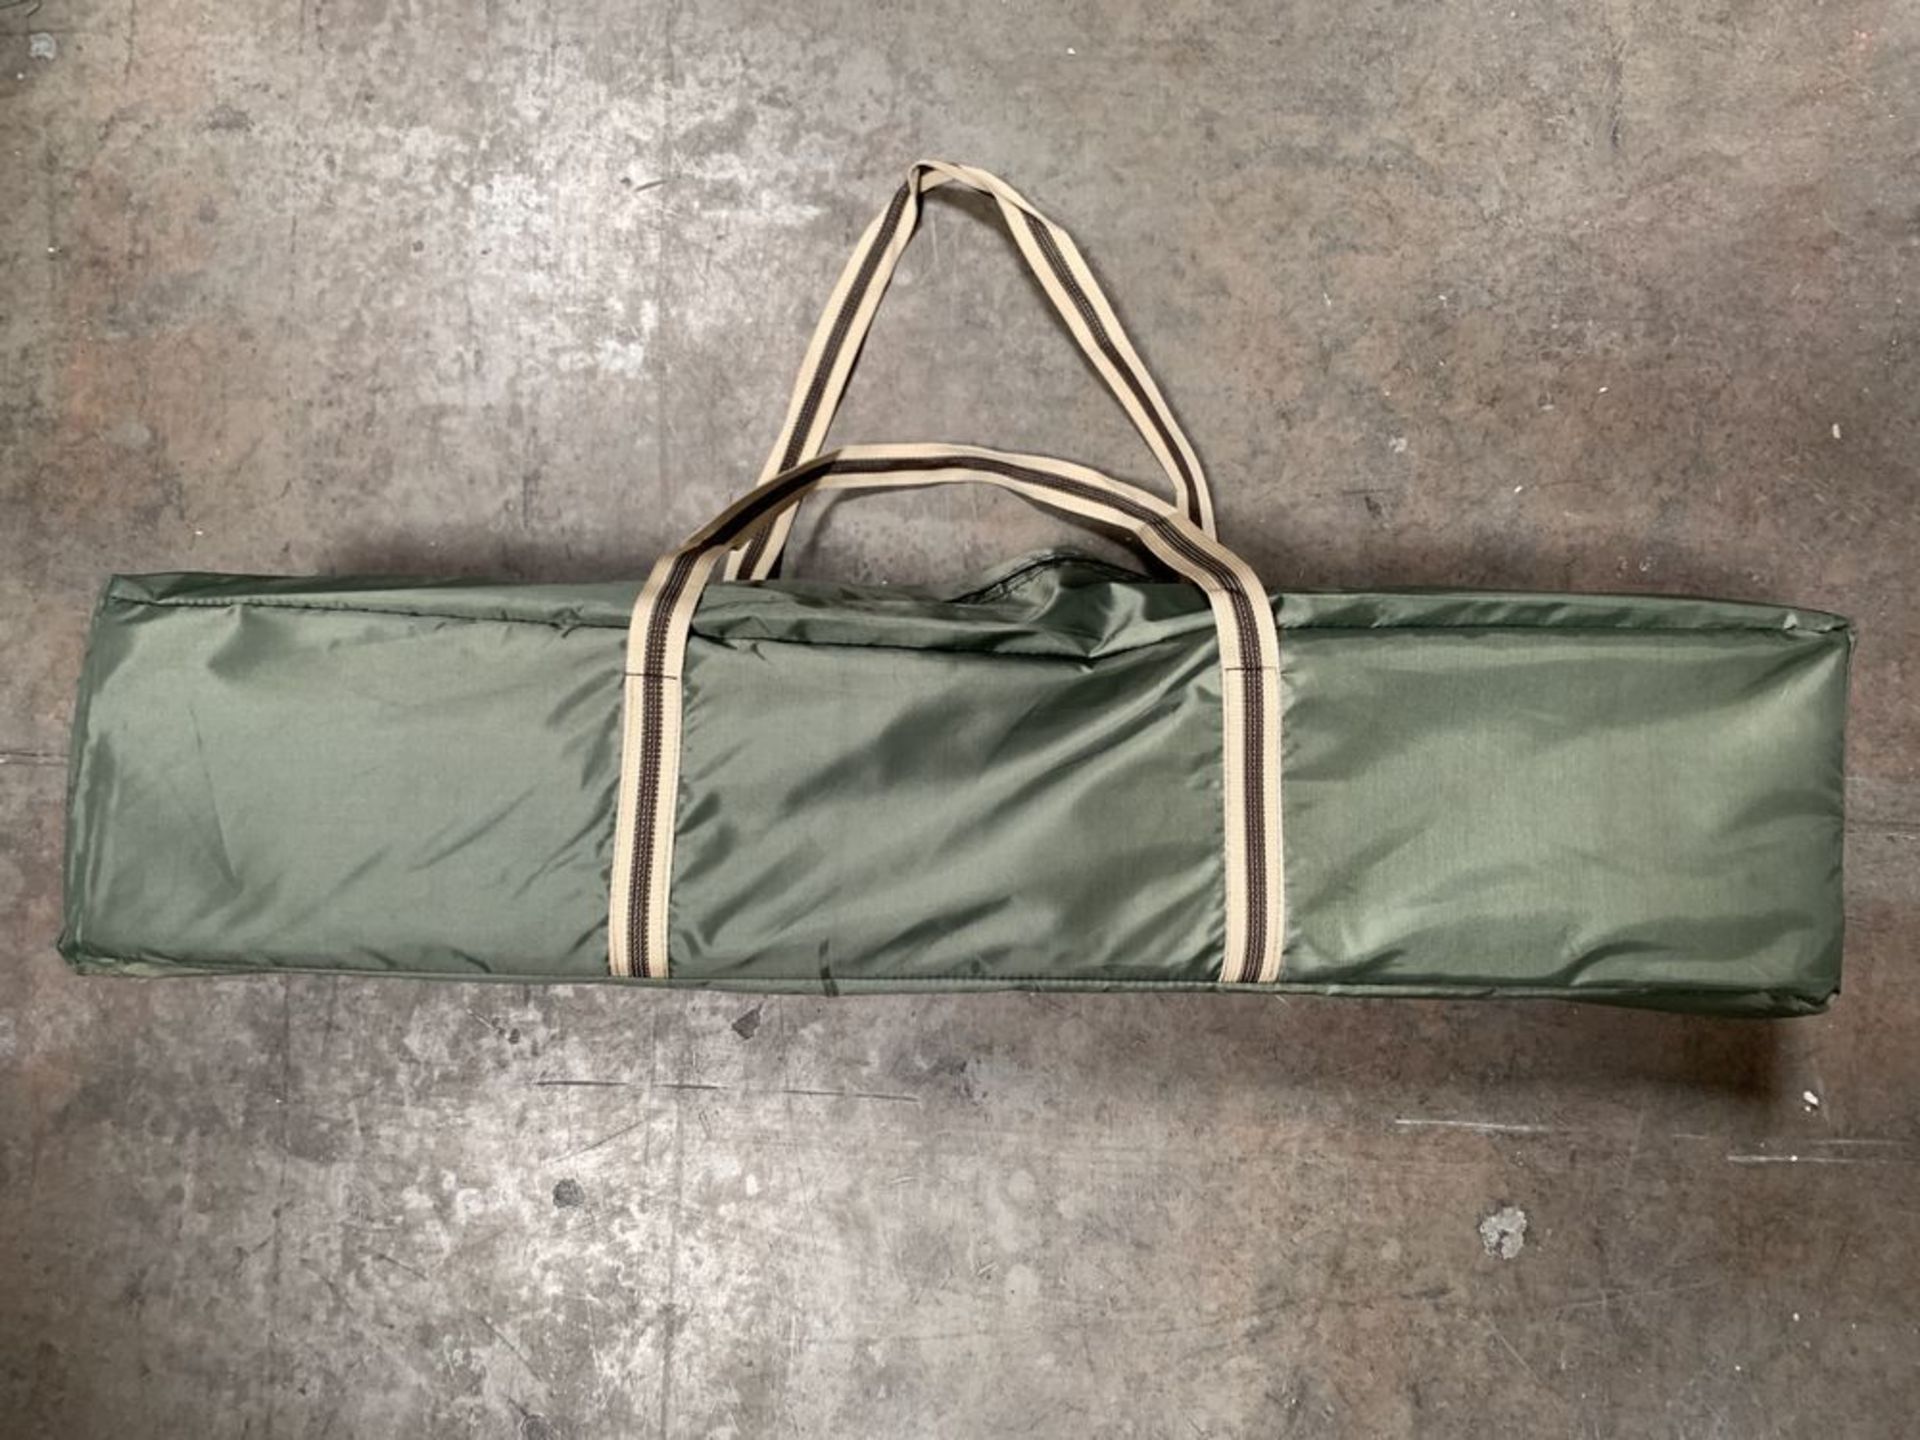 New Camping Tent in Travel Bag, 3-4 Person Tent, Army Green - Image 3 of 3